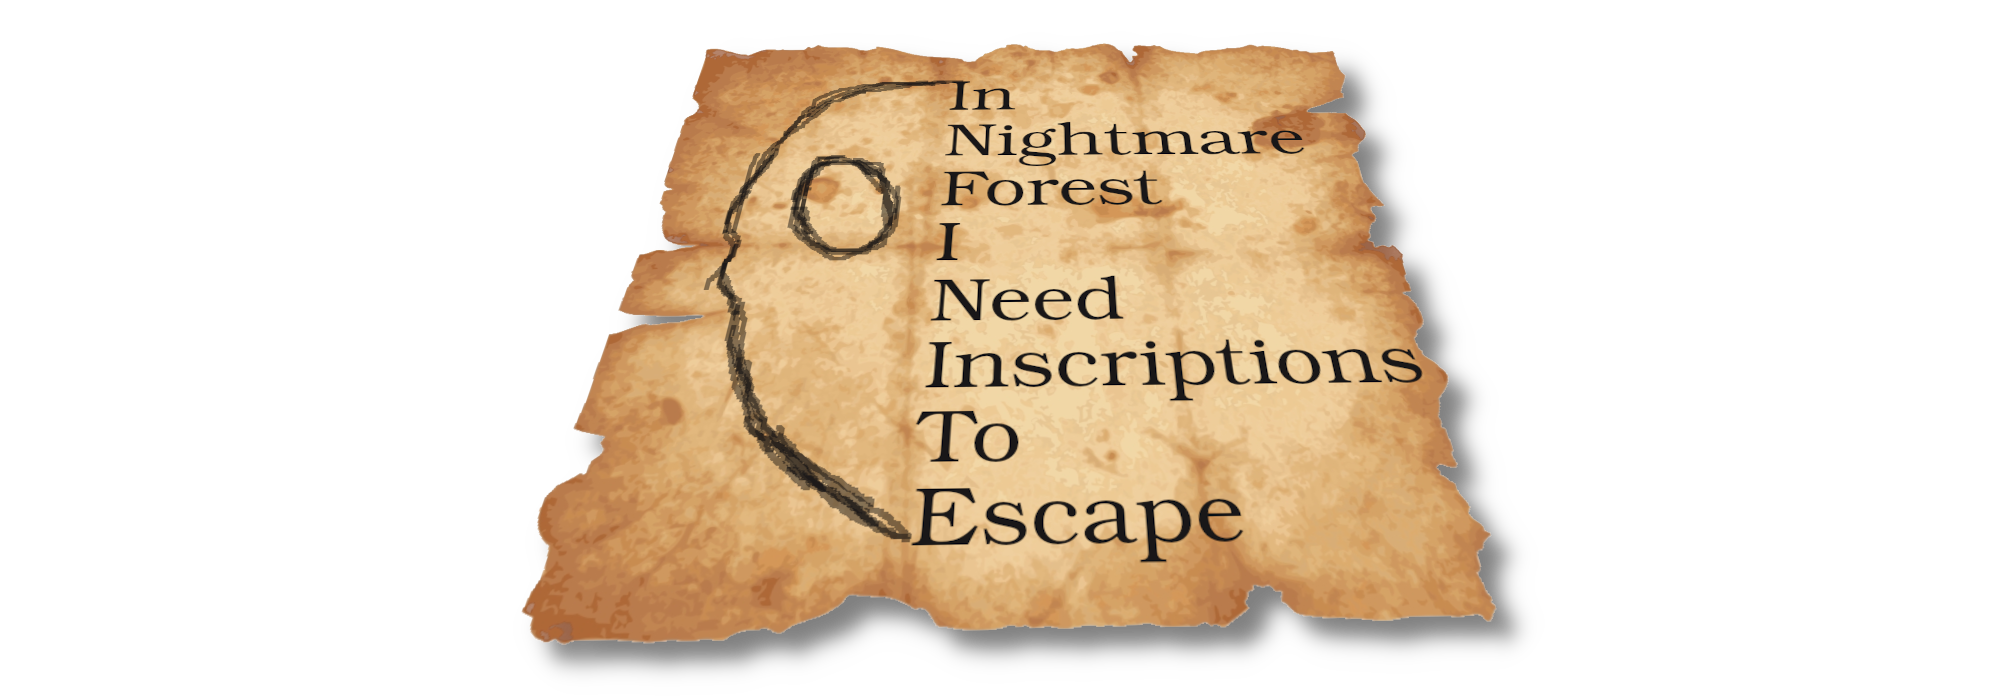 In Nightmare Forest I Need Inscriptions To Escape